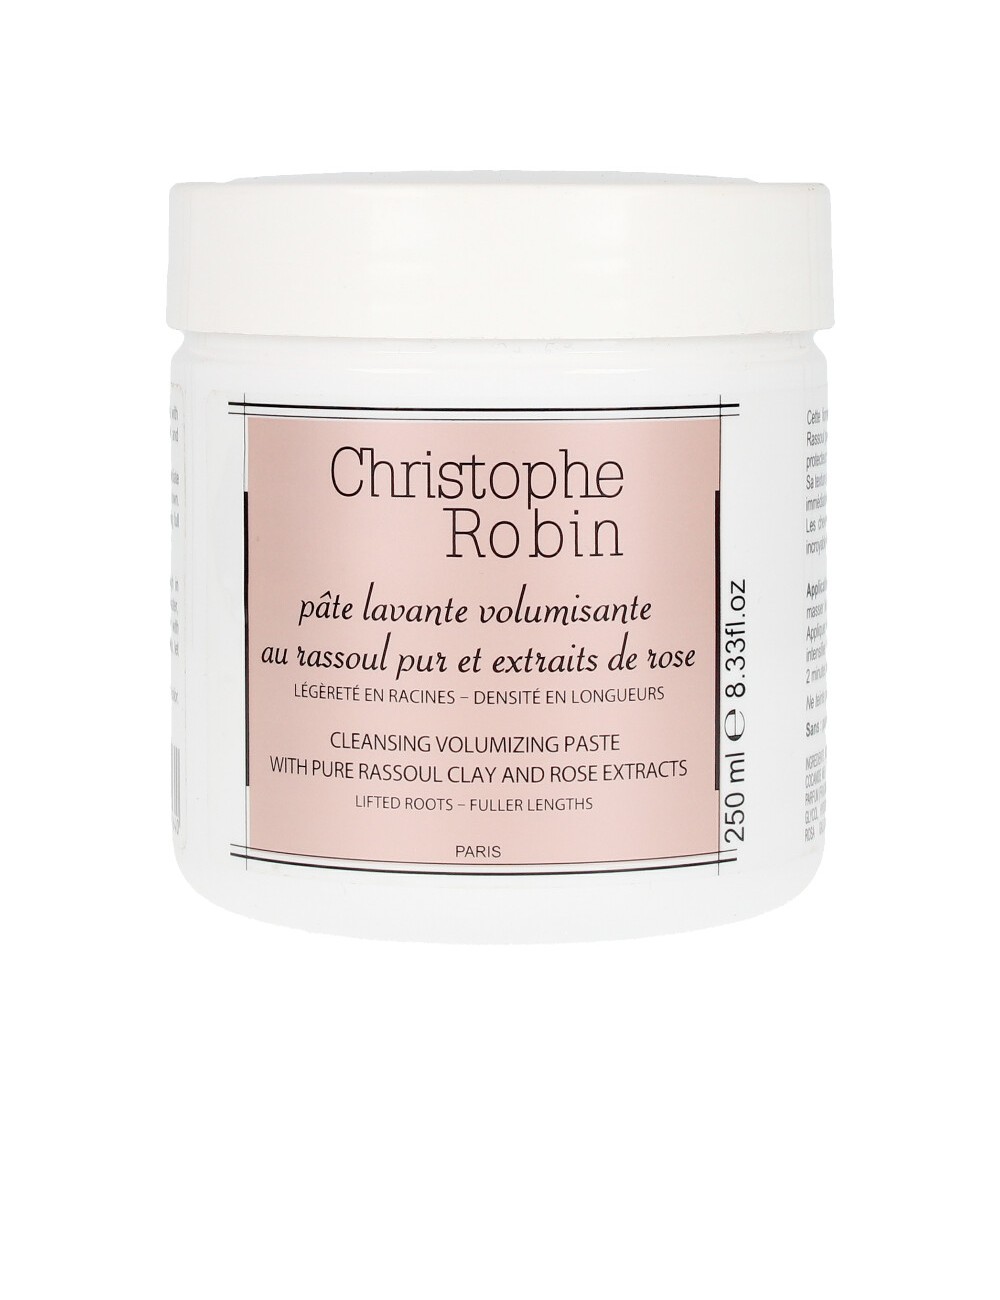 VOLUMIZING paste with pure rassoul clay&rose extracts 25 ml